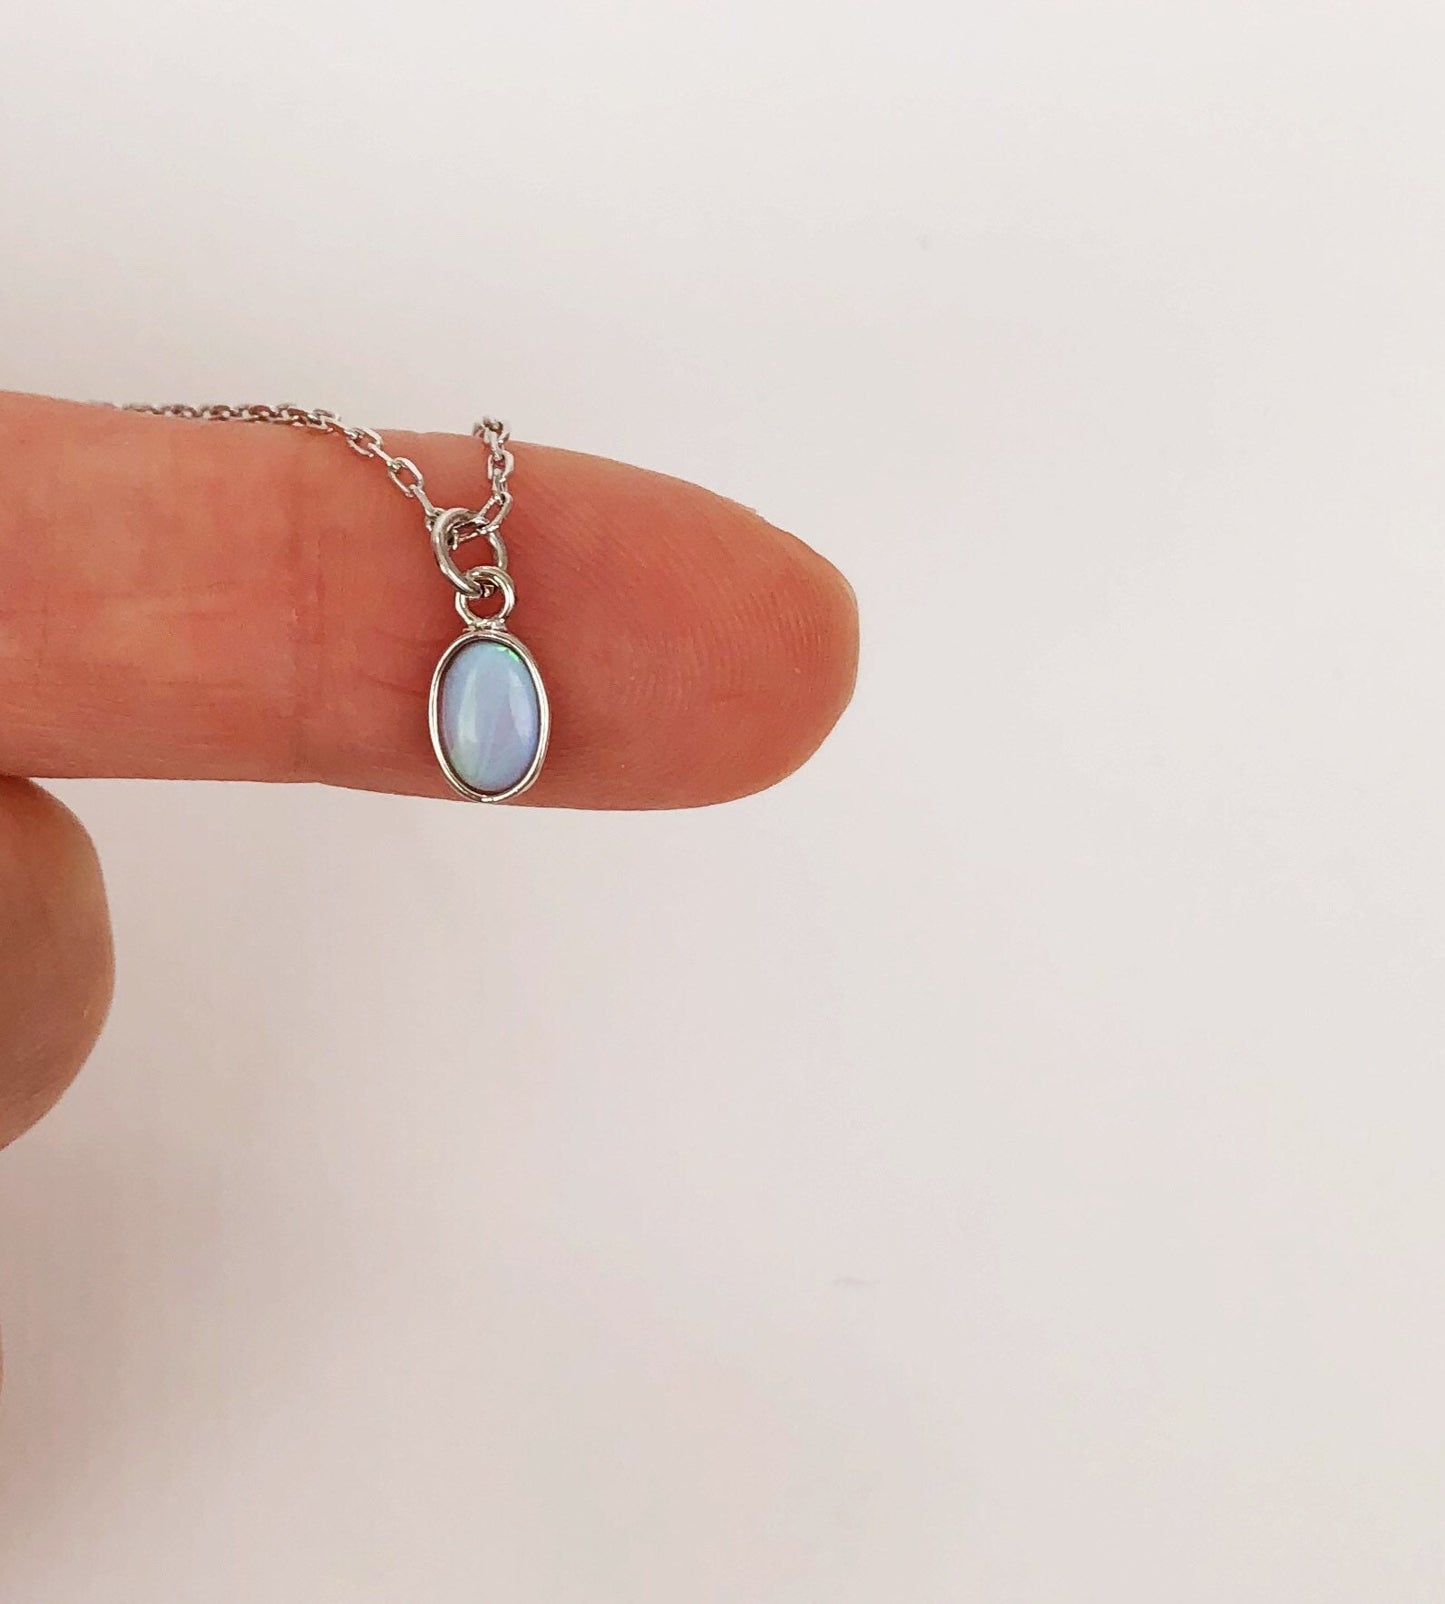 Opal necklace, silver necklace, dainty necklace, october birthstone, Dainty jewelry, jewelry, birthday gifts for her, simple necklace